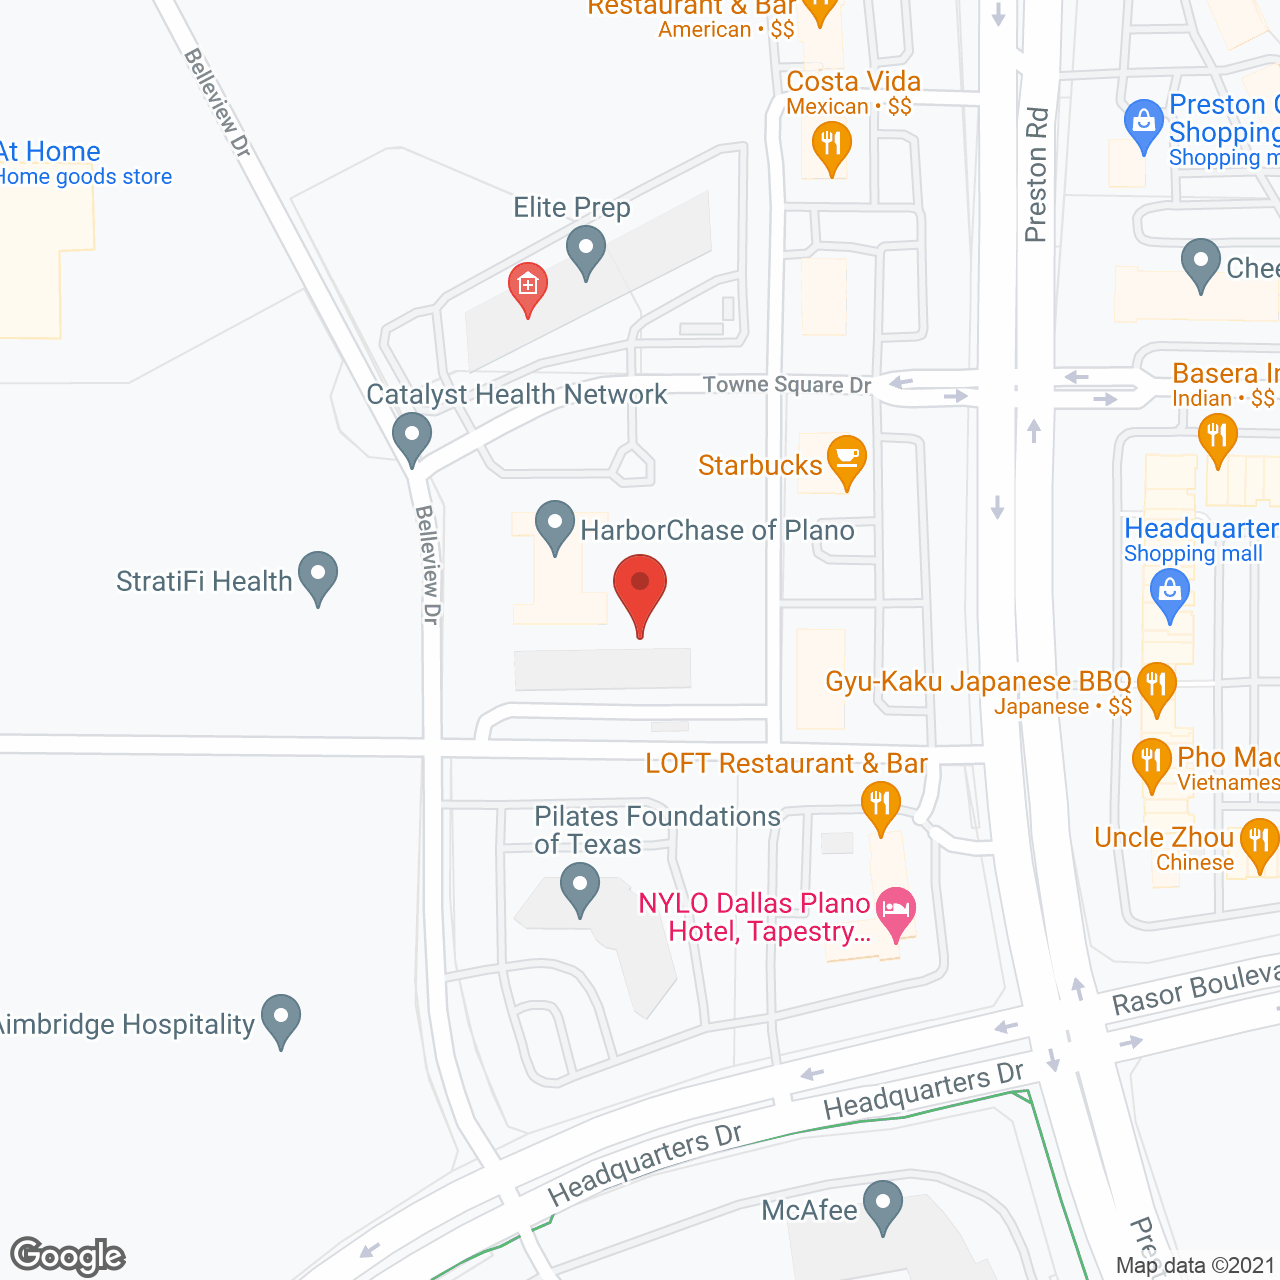 HarborChase of Plano in google map